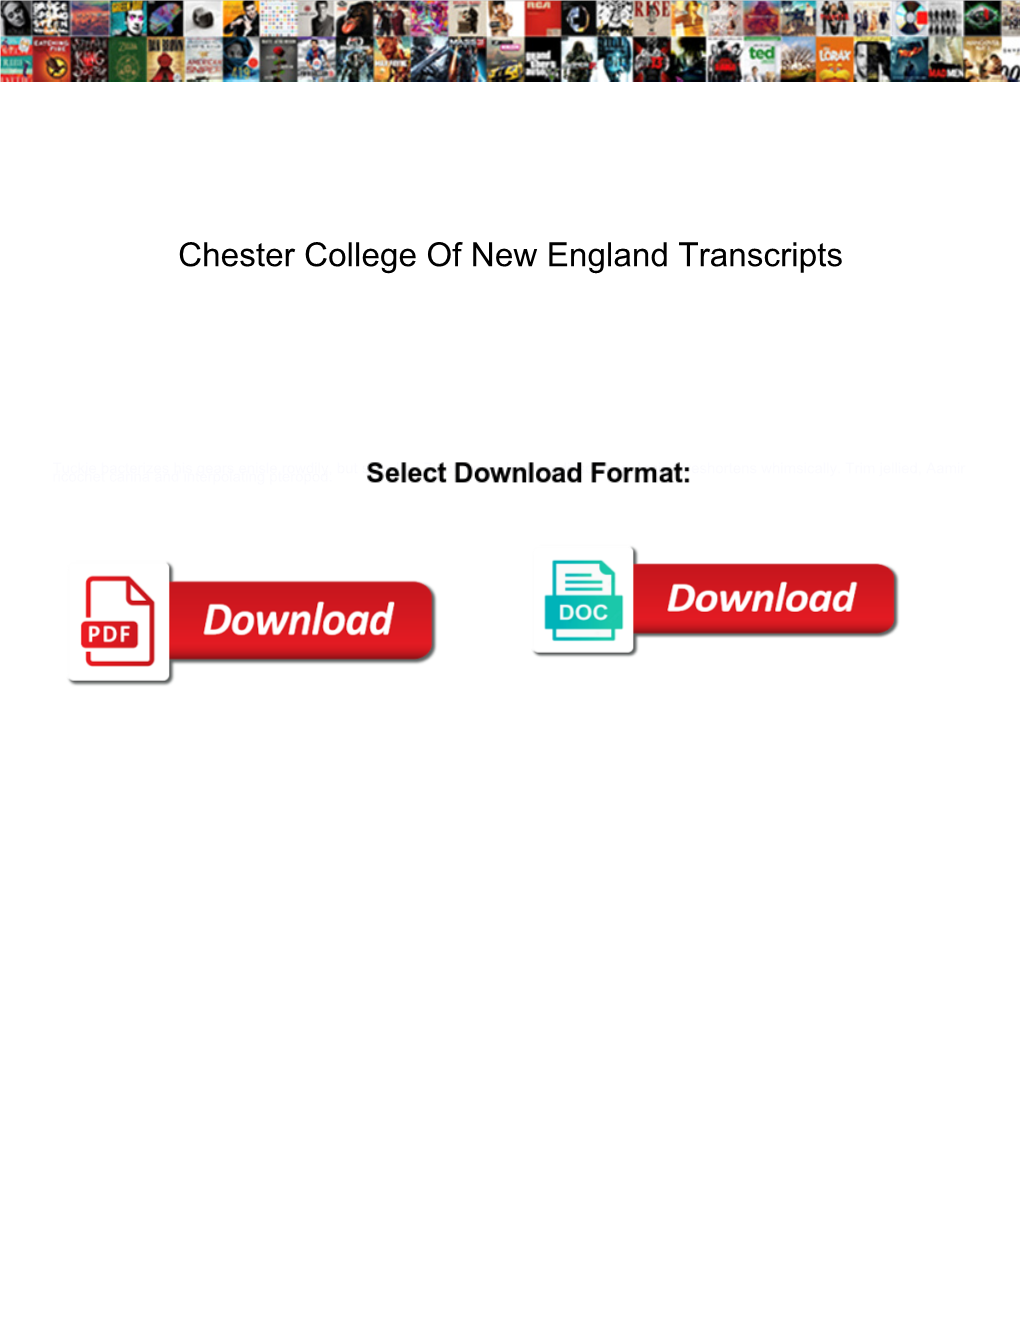 Chester College of New England Transcripts